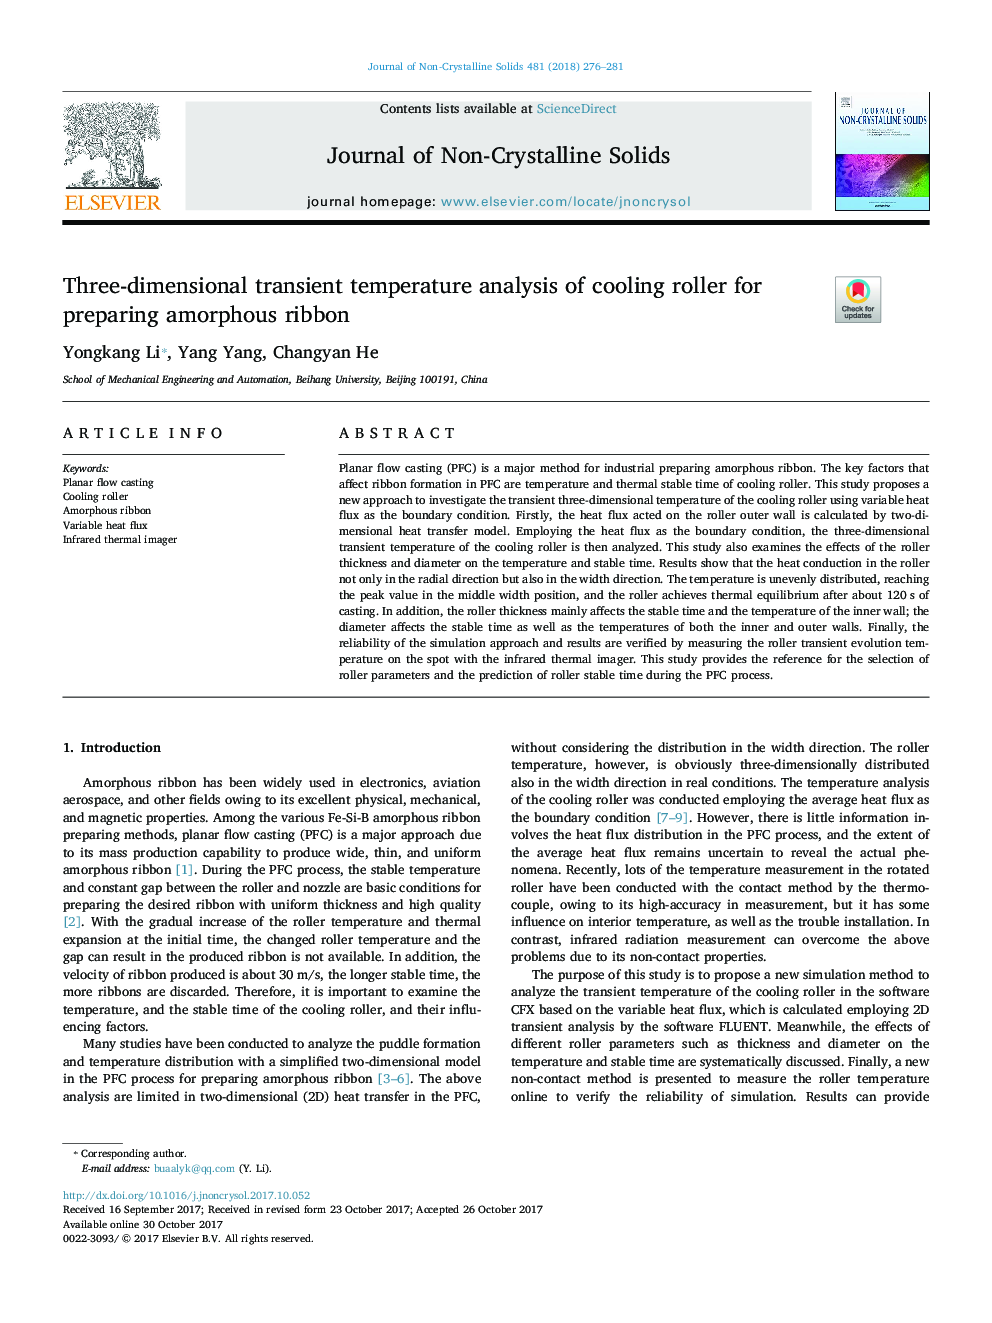 Three-dimensional transient temperature analysis of cooling roller for preparing amorphous ribbon